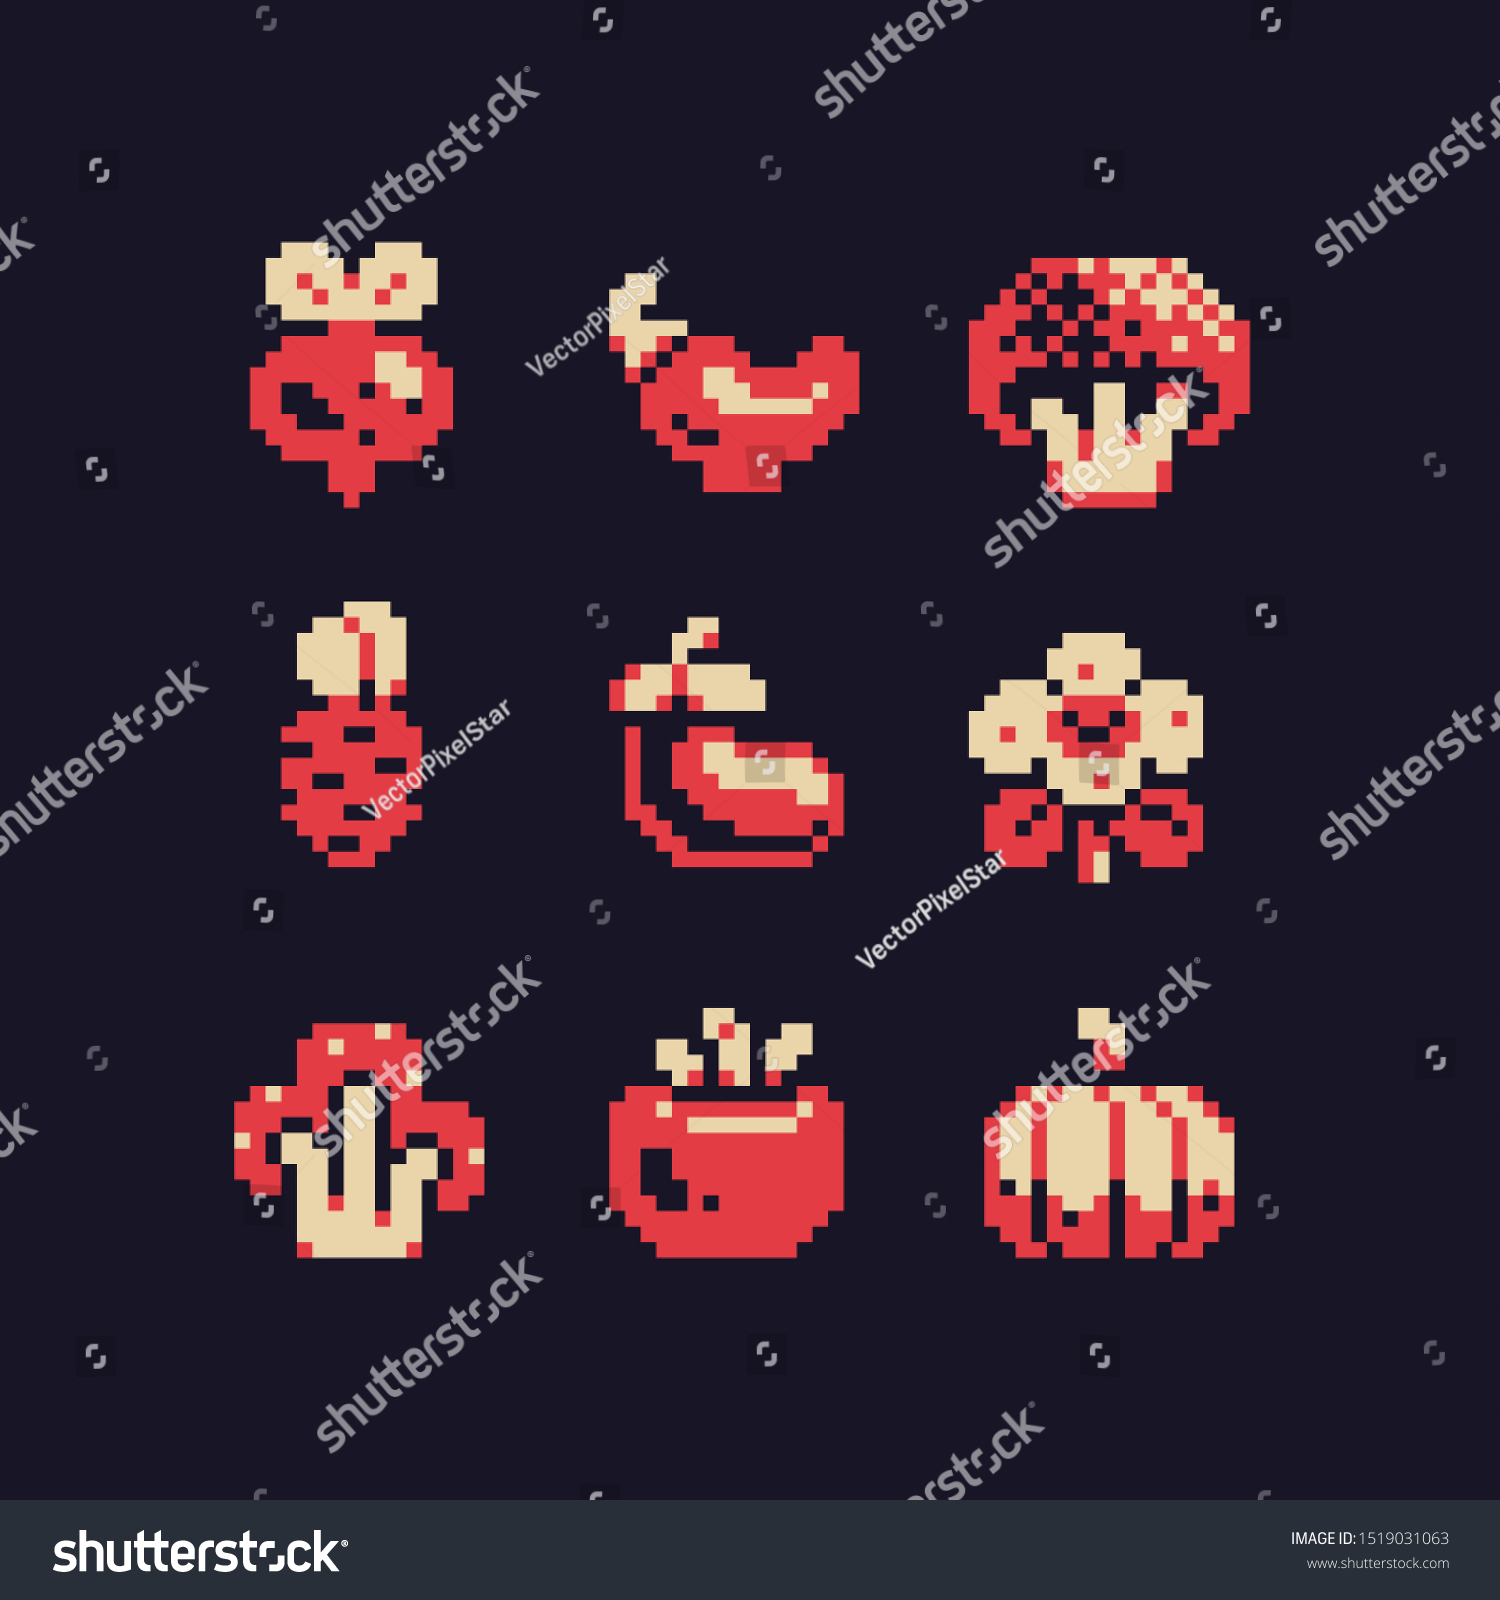 Vegetables Sticker Perfect Pixel Art Icons Set Royalty Free Stock Vector 1519031063 6924